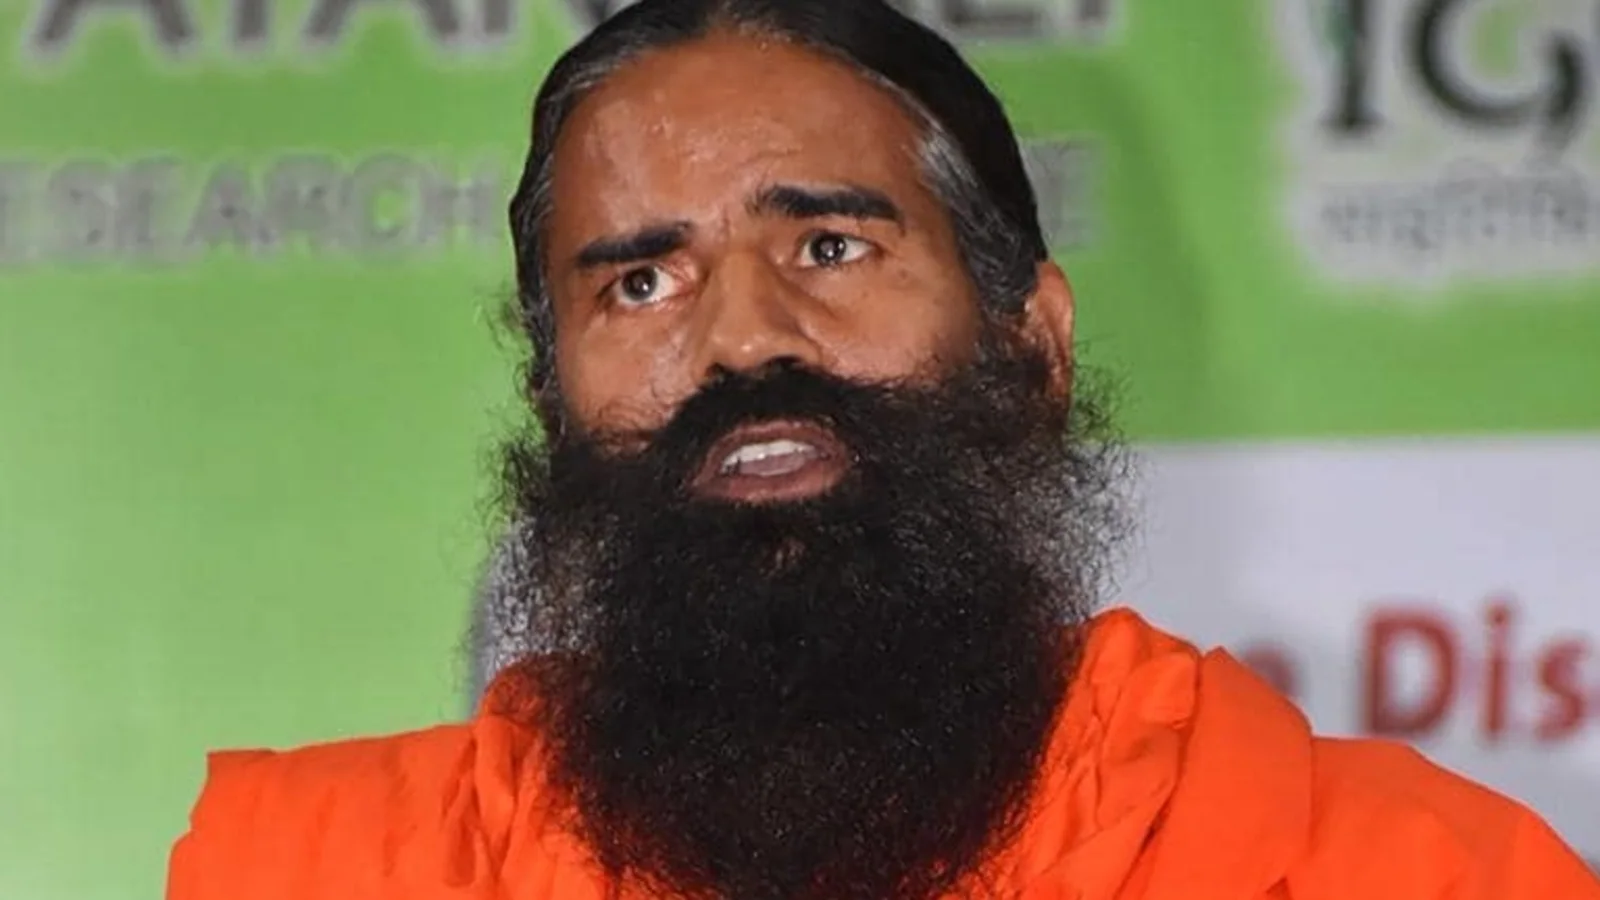 Ramdev to launch IPO of Patanjali brands soon, says report